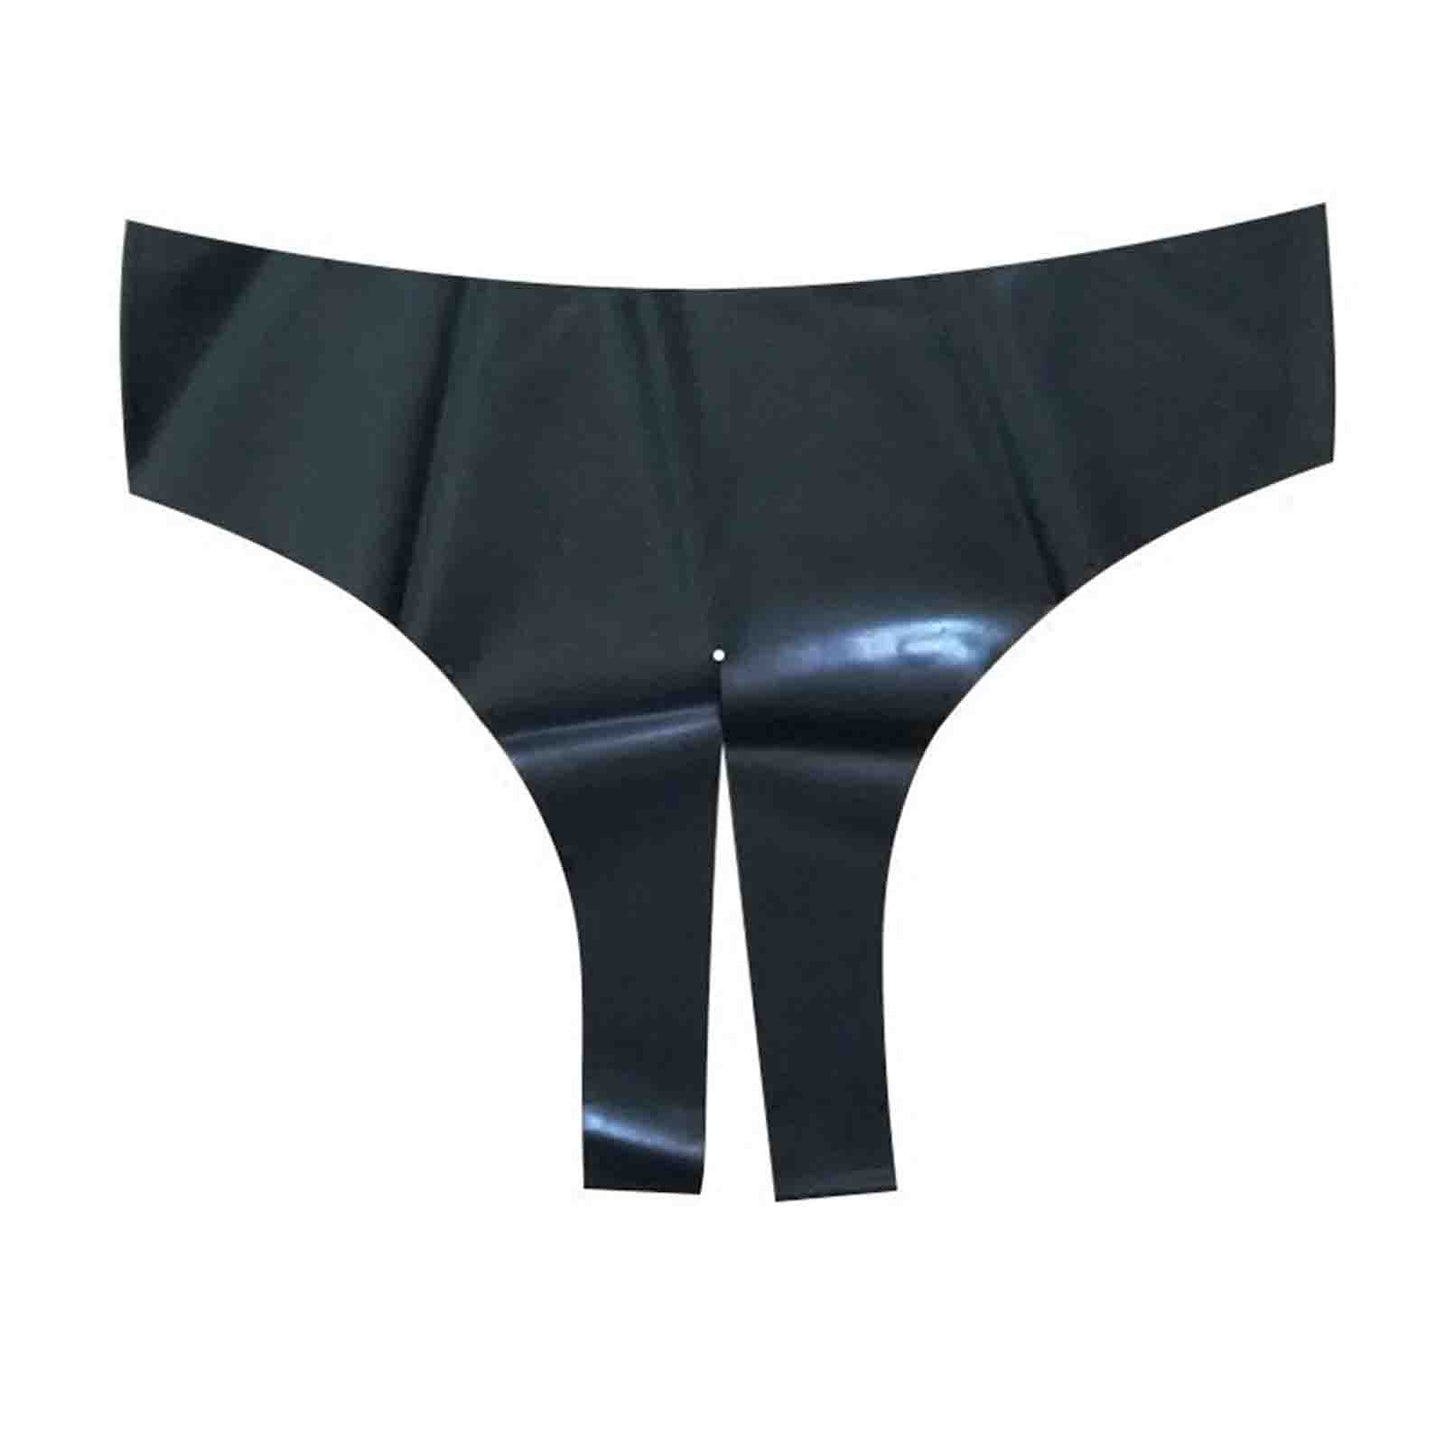 MONNIK Latex hot Underwear Women Crotchless Panties Sexy Briefs open crotch shorts for fetish Catsuit Club wear